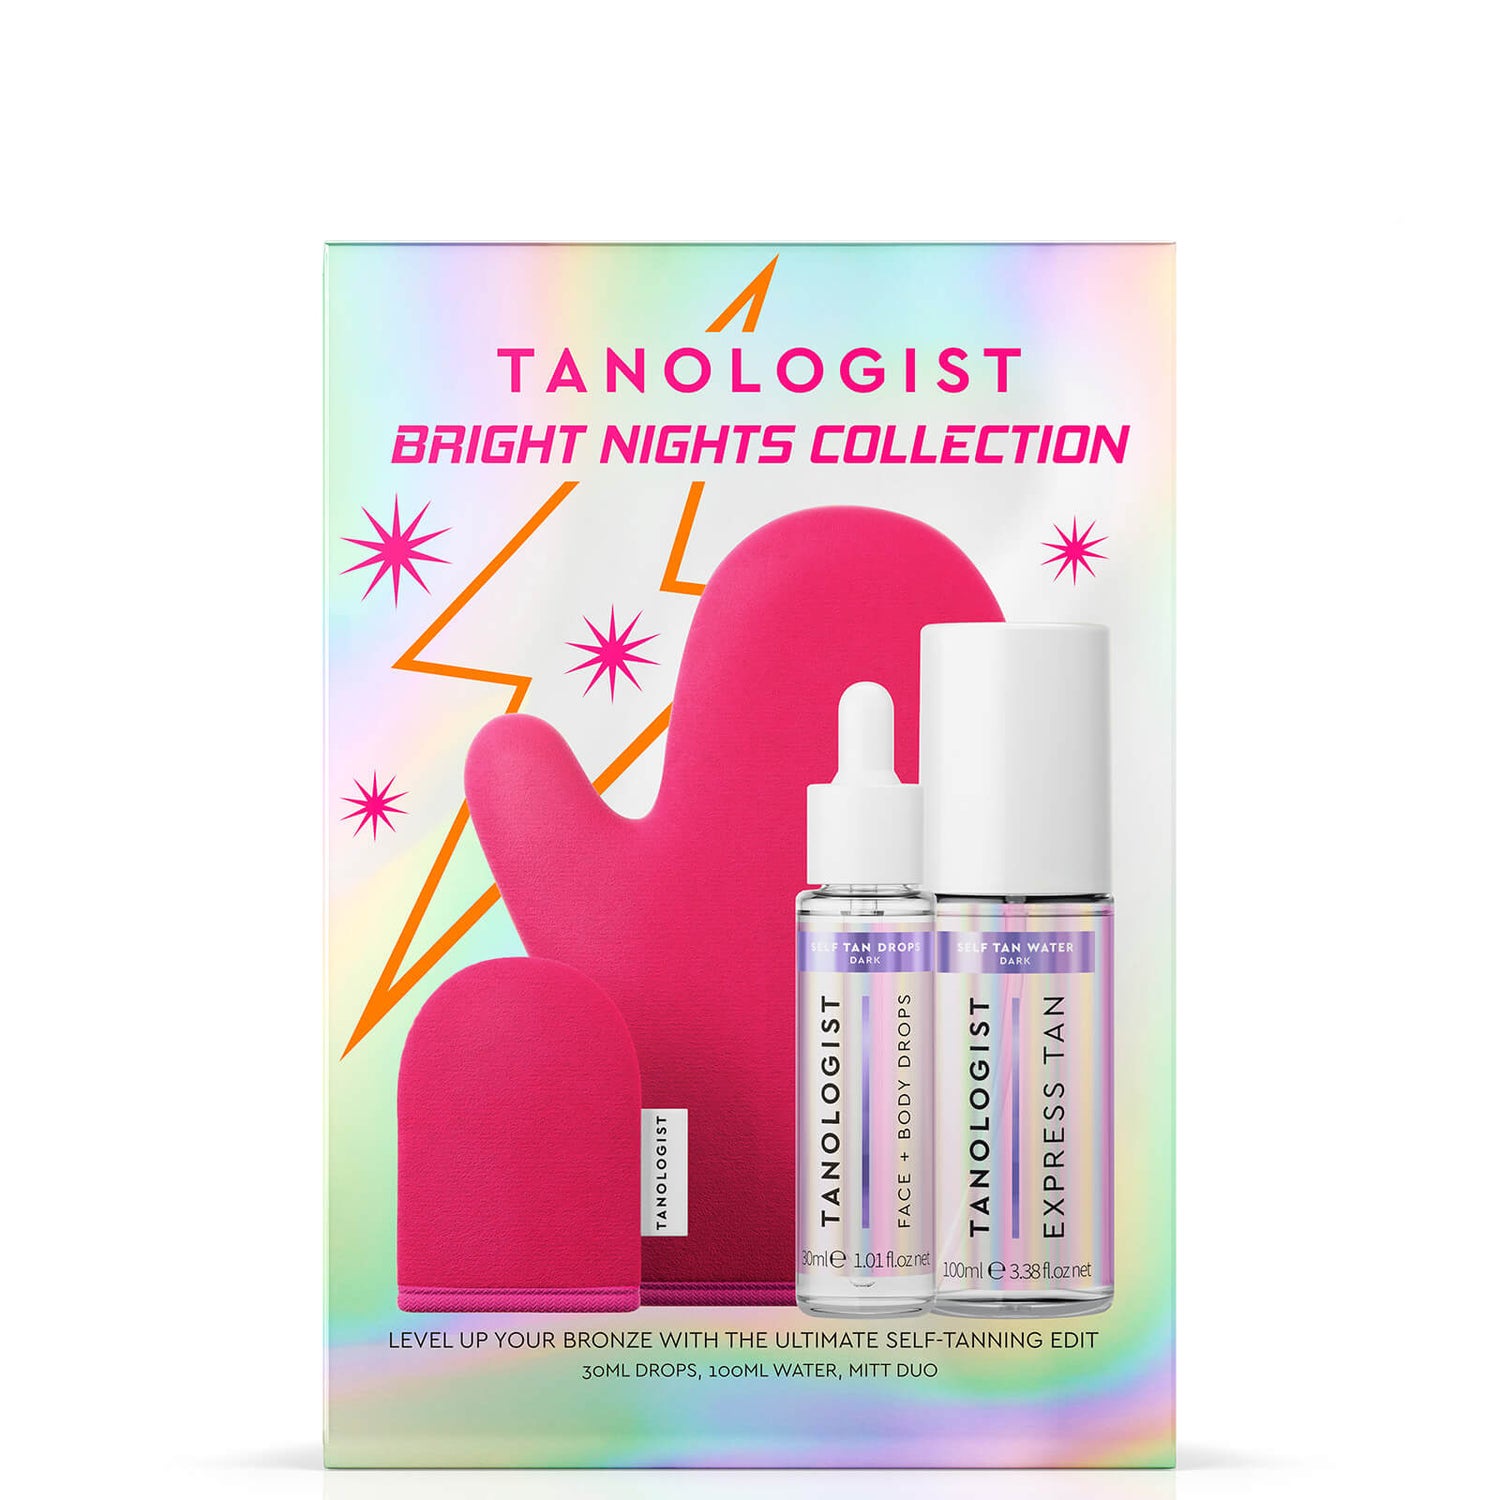 Tanologist Bright Nights Collection - Dark